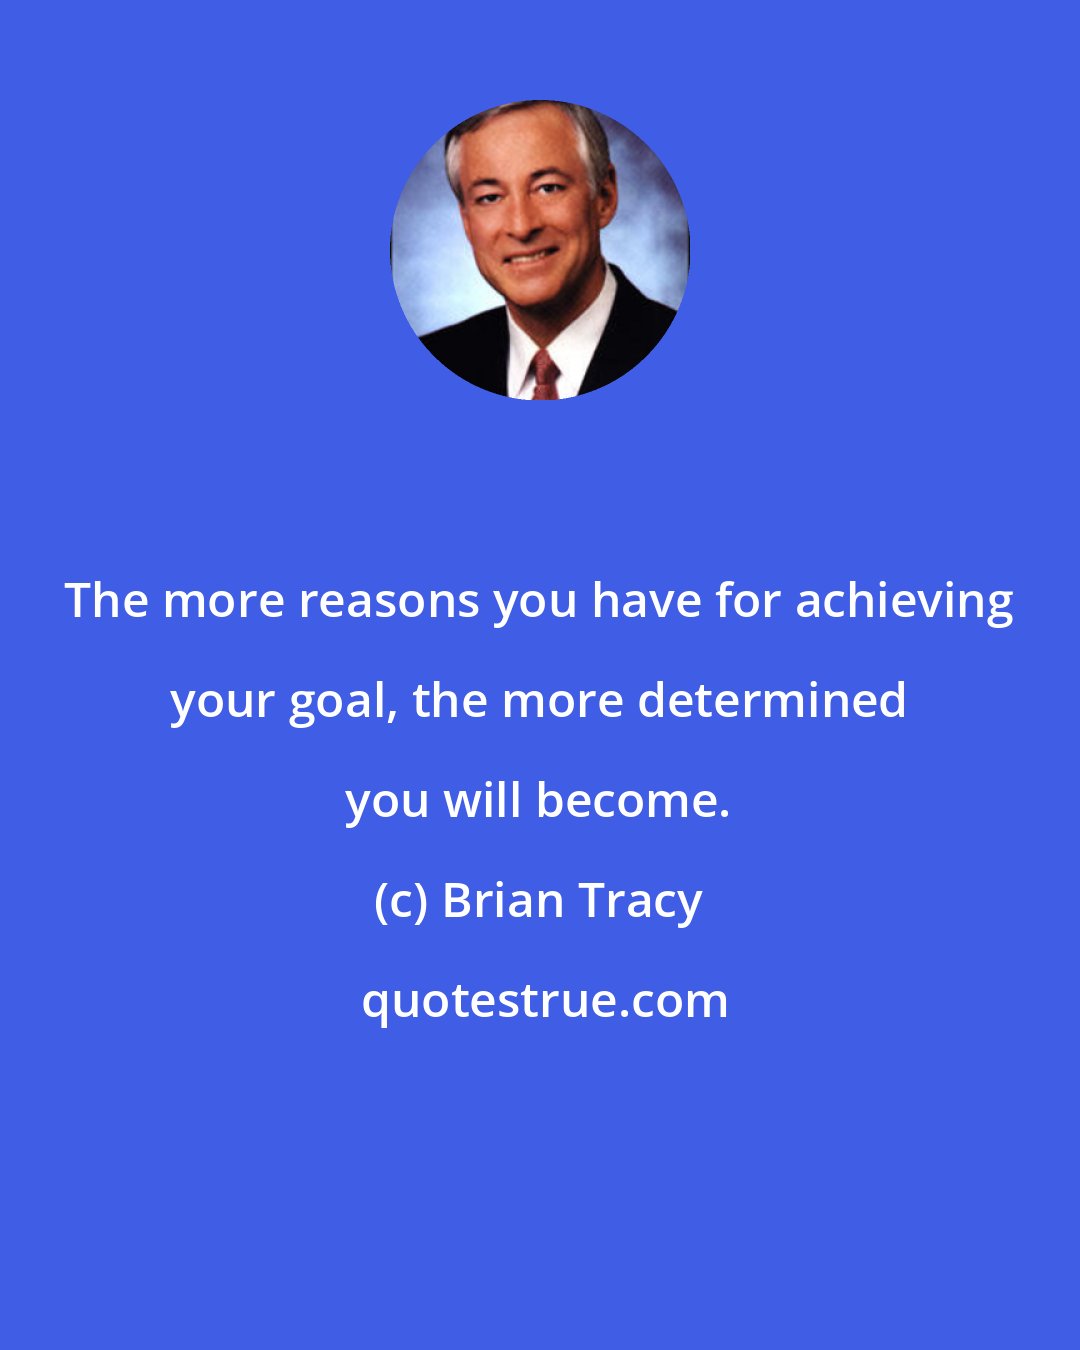 Brian Tracy: The more reasons you have for achieving your goal, the more determined you will become.